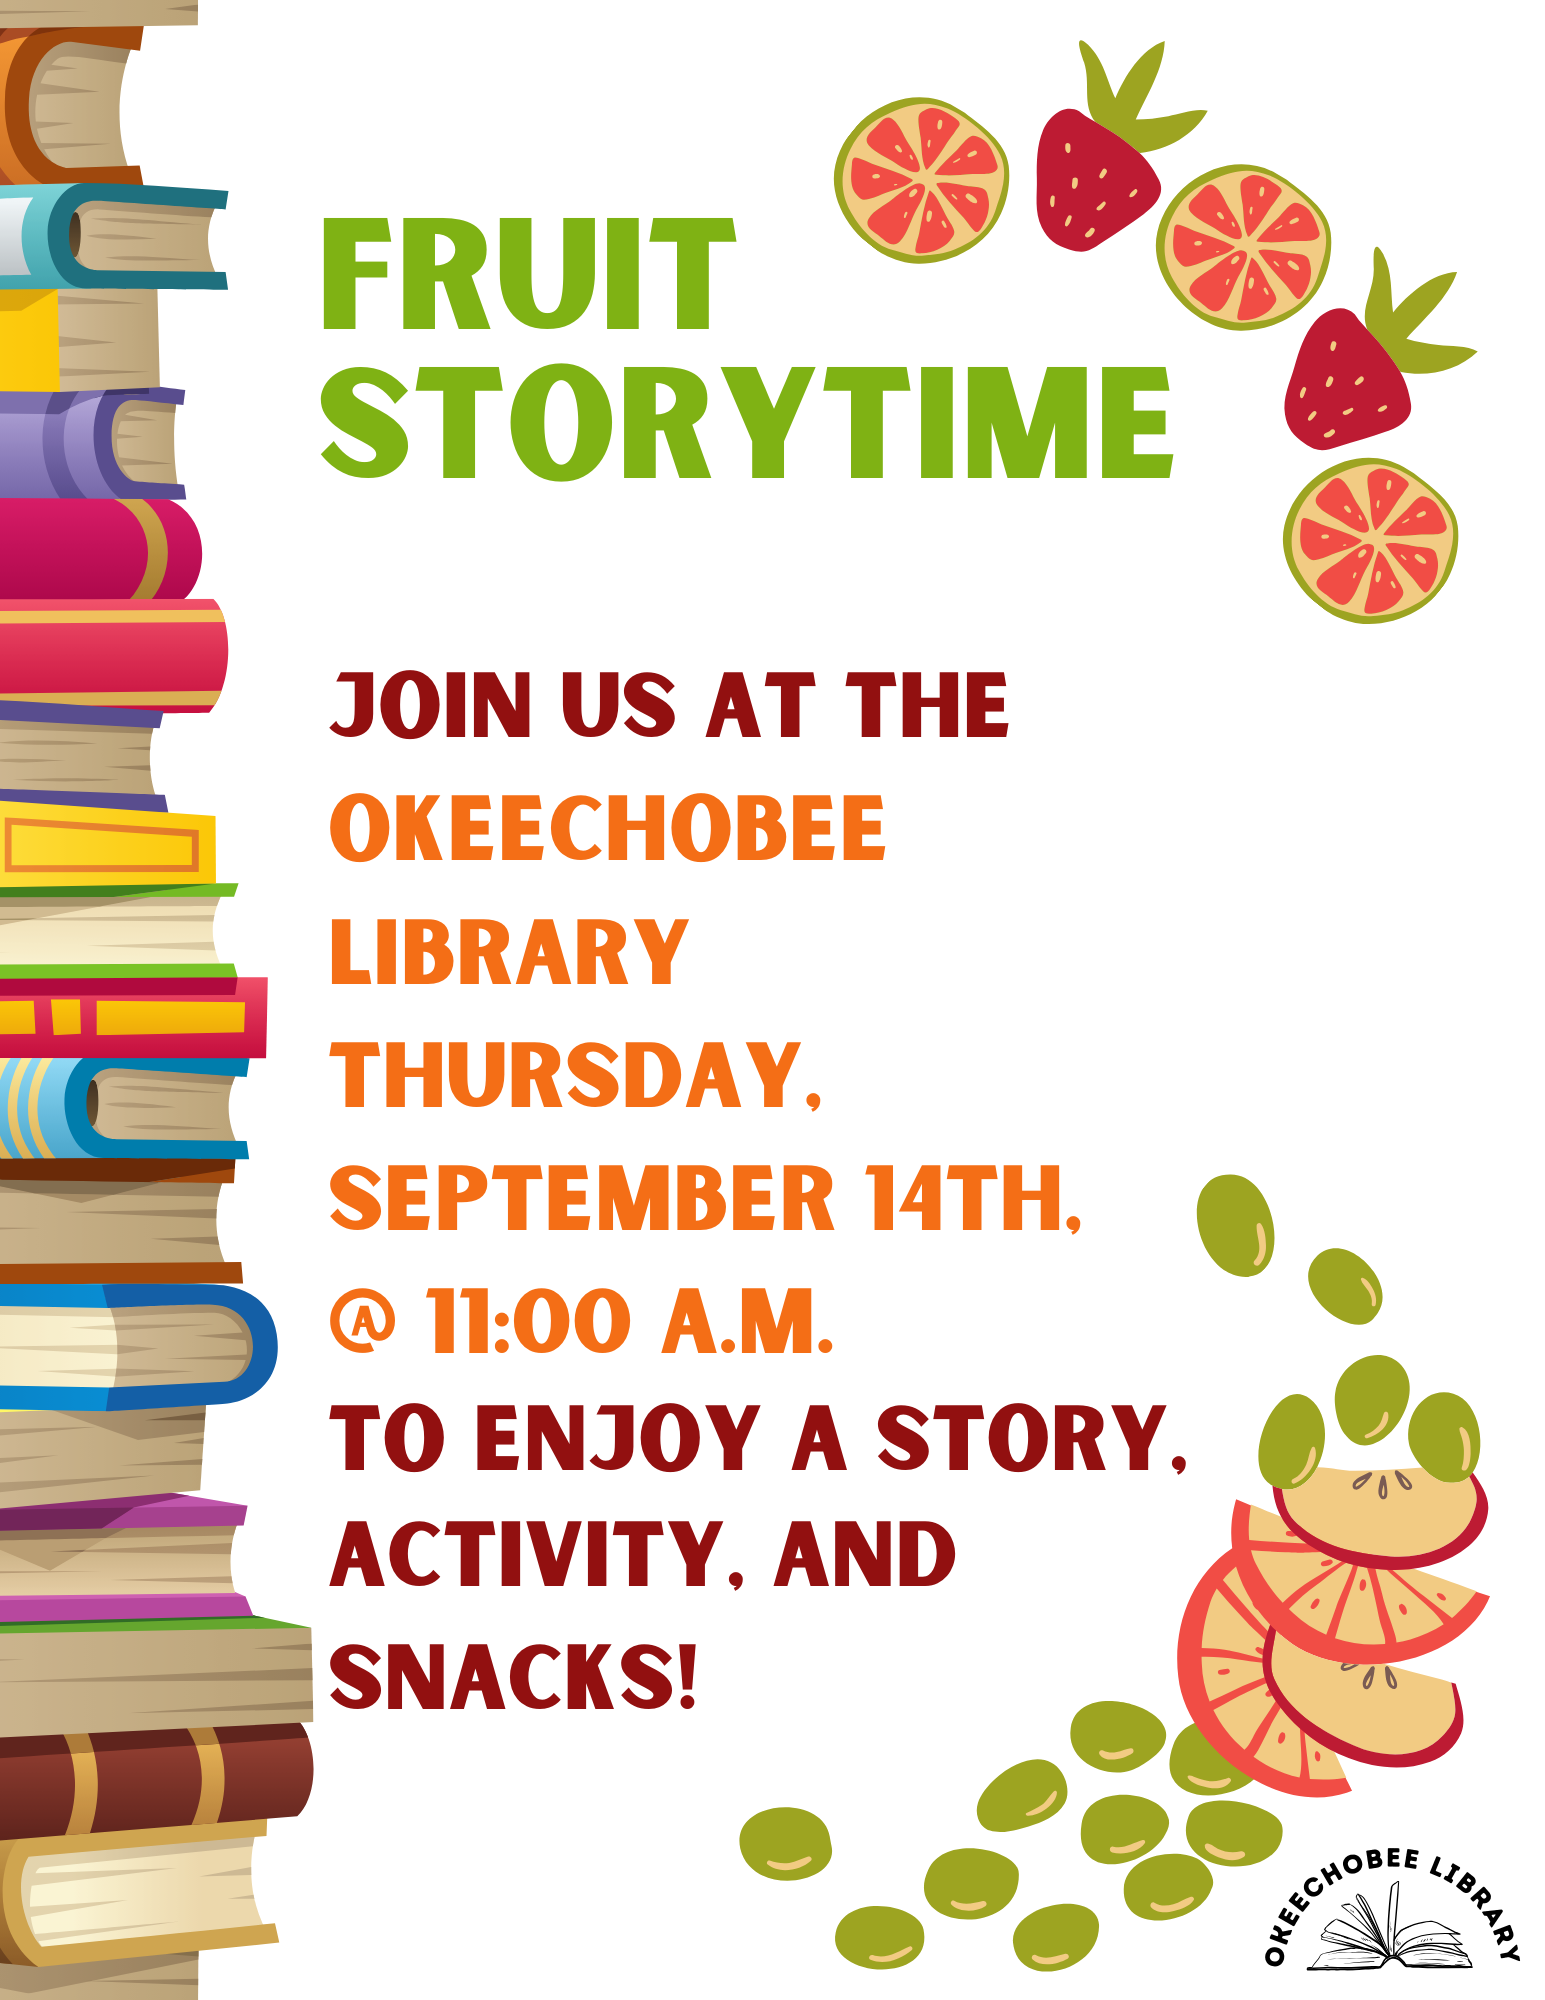 Join us at the Okeechobee Library on September 14th at 11:00 A.M. for our Fruit Story Time! Come enjoy a story, a simple activity, and fun snacks!